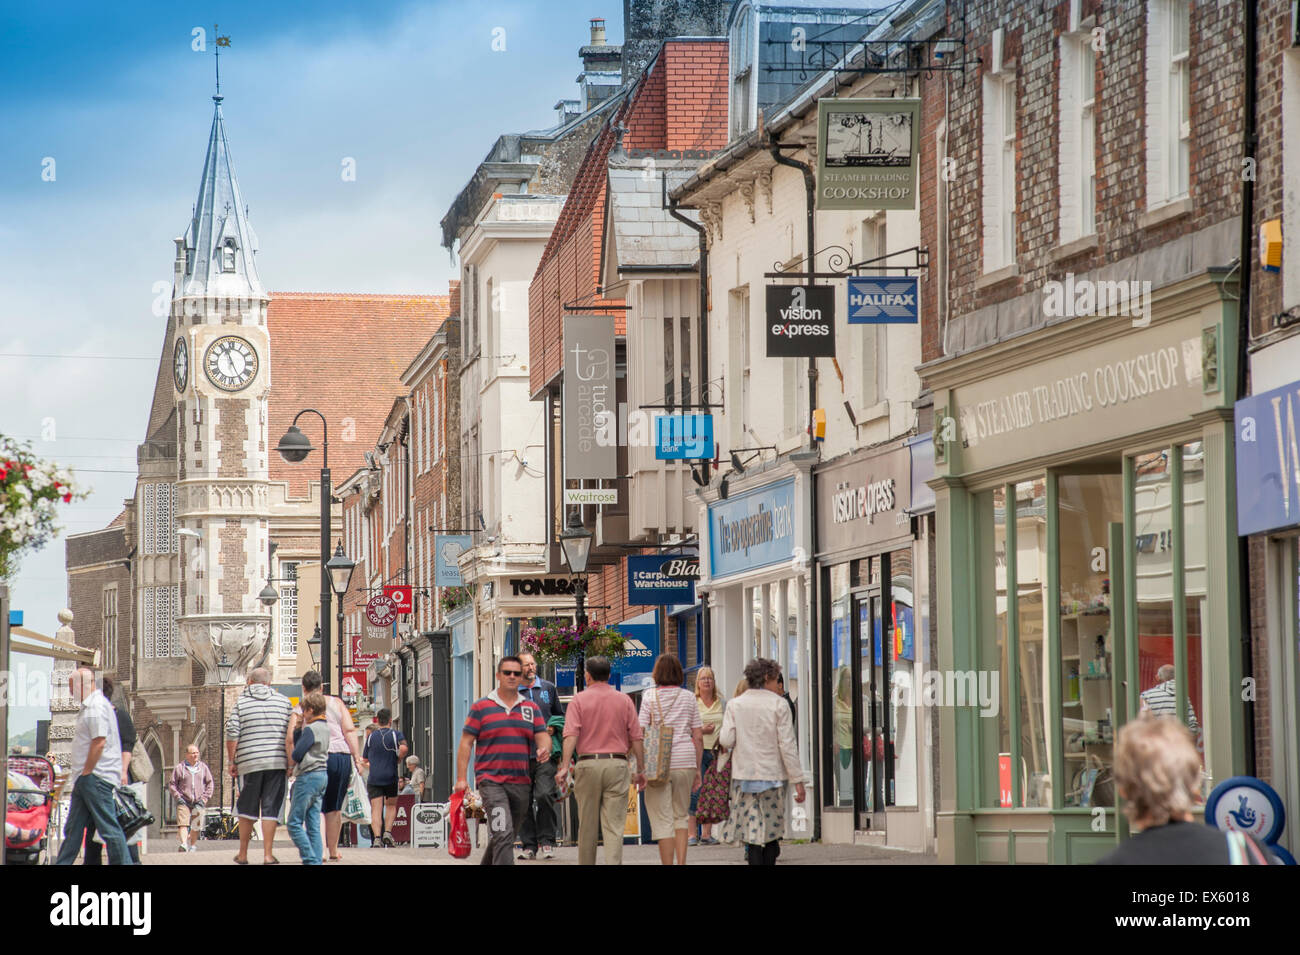 Looking north along New Street and Cornhill in Dorchester, Dorset, England, UK. Showing the clock tower of the Corn Exchange. Stock Photo